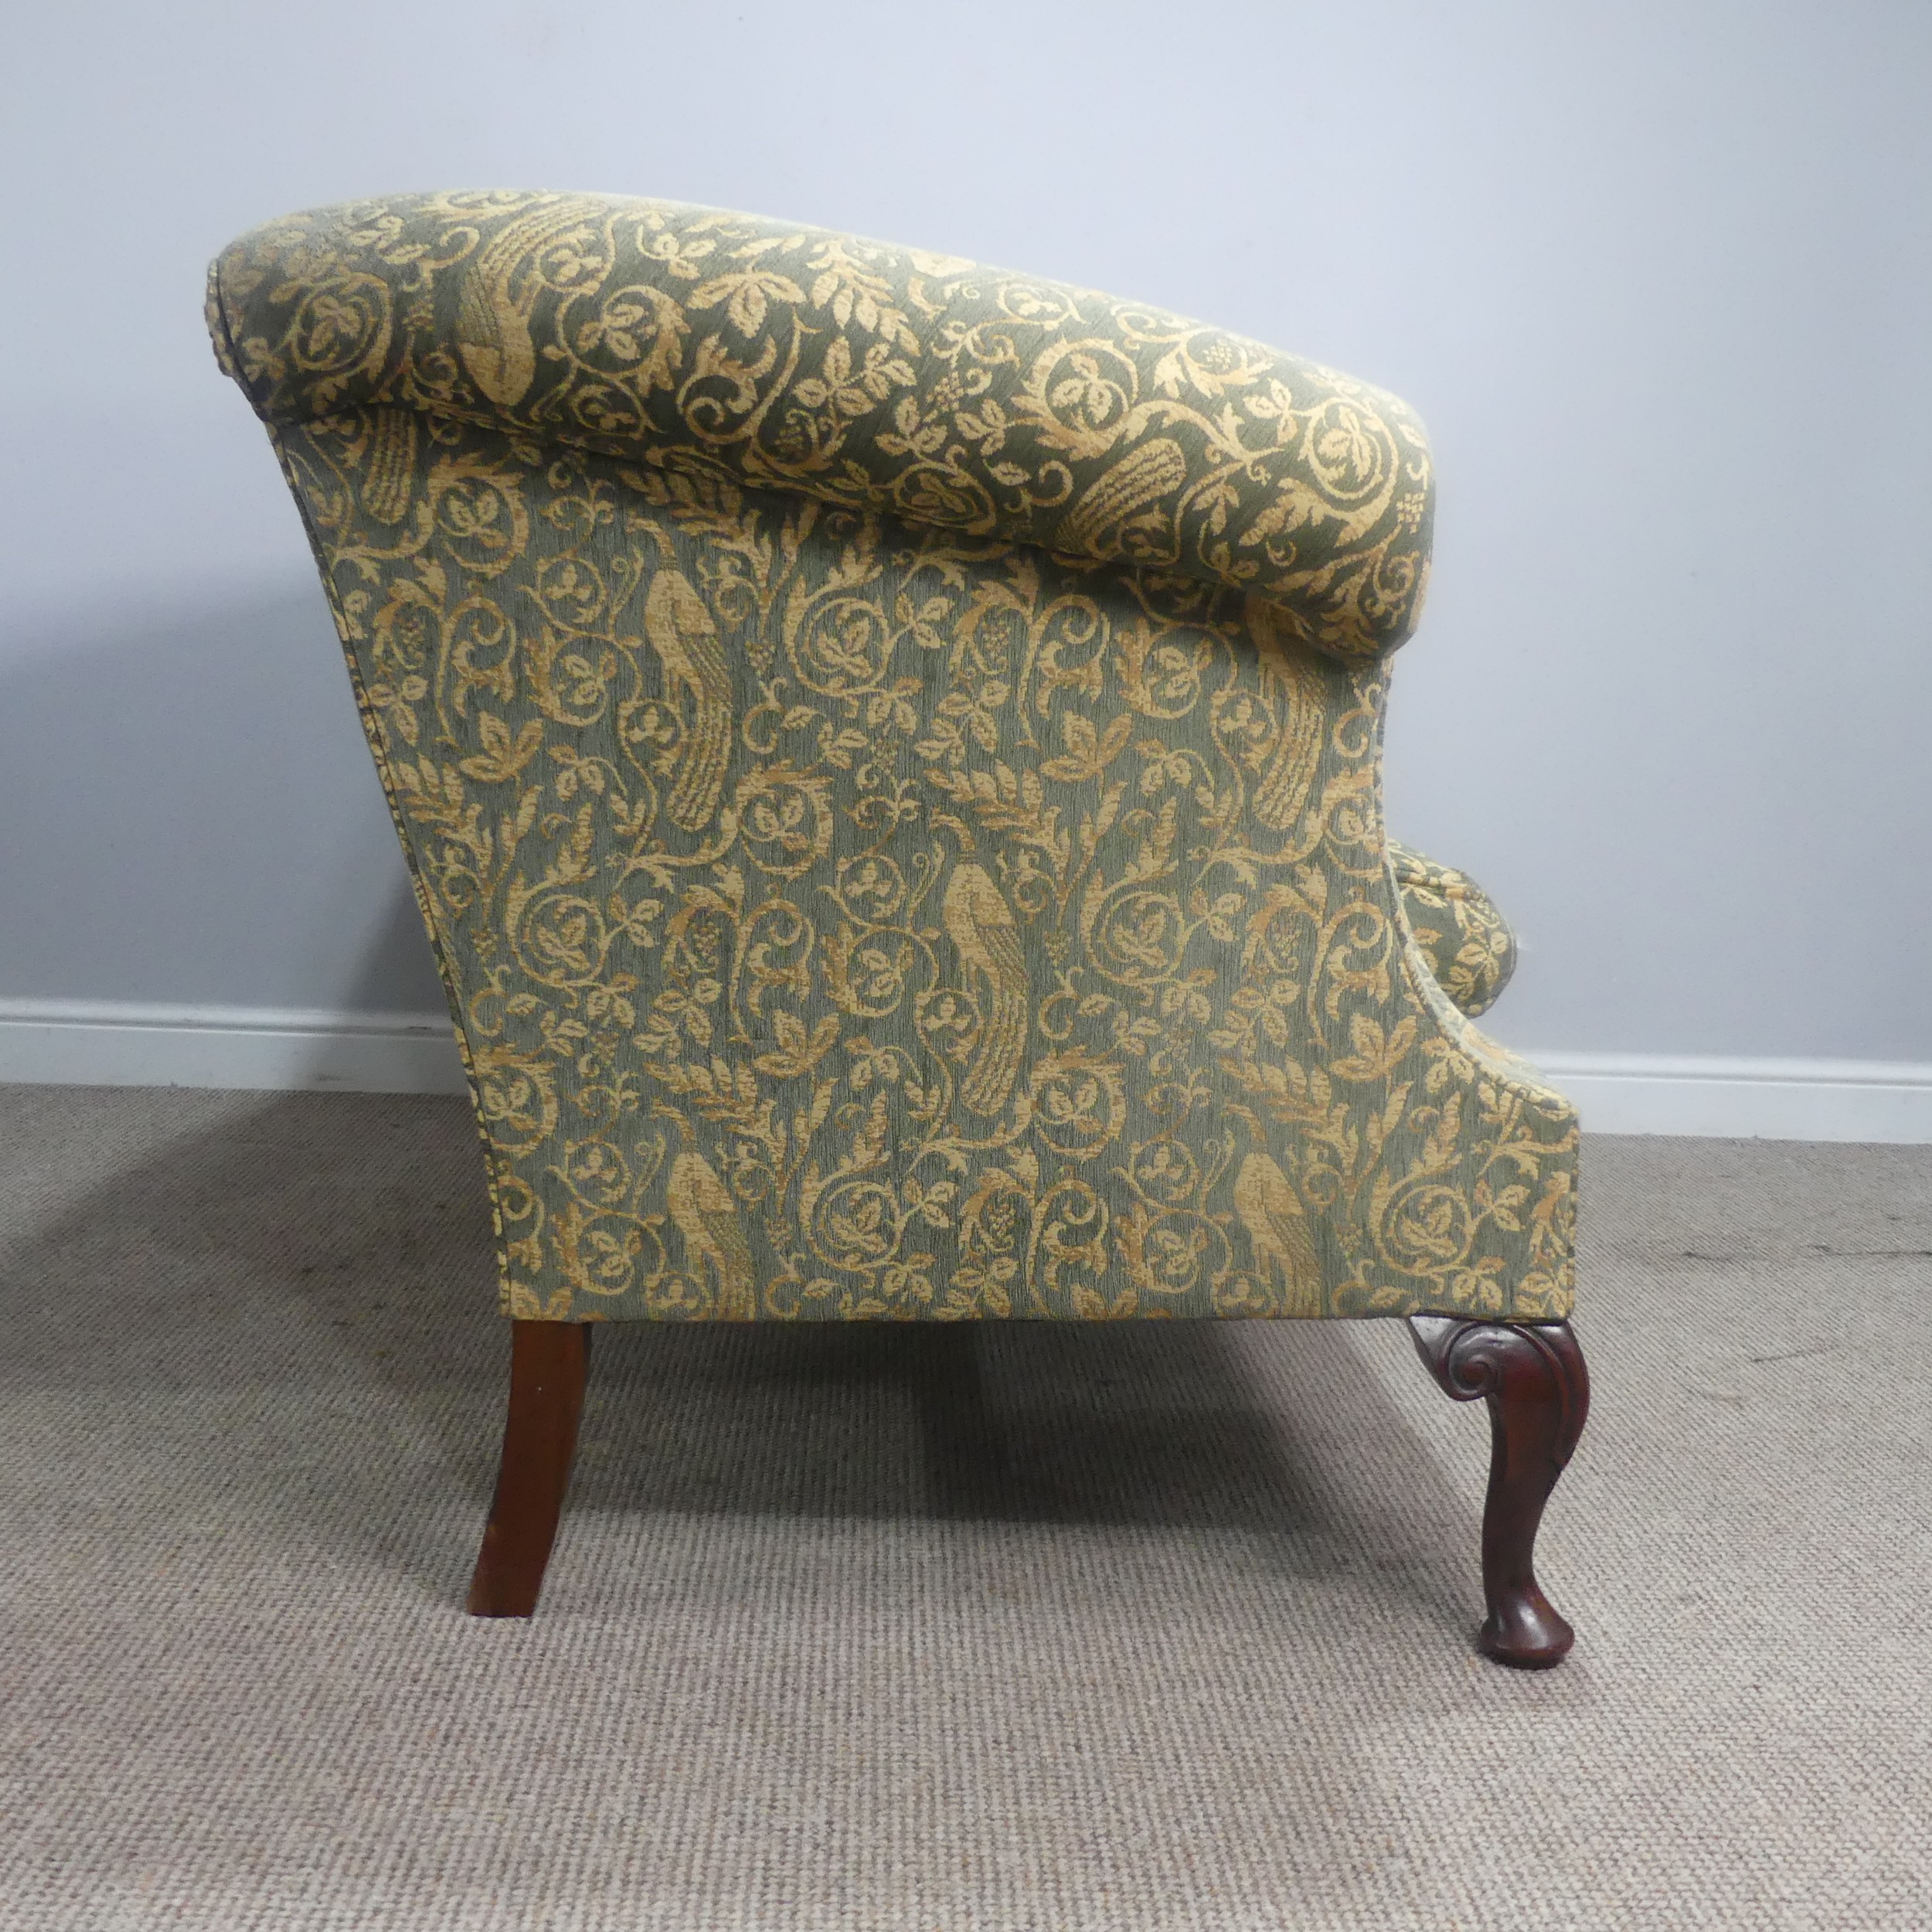 An antique George III style upholstered scroll end two-seater Sofa, raised on carved cabriole - Image 4 of 11